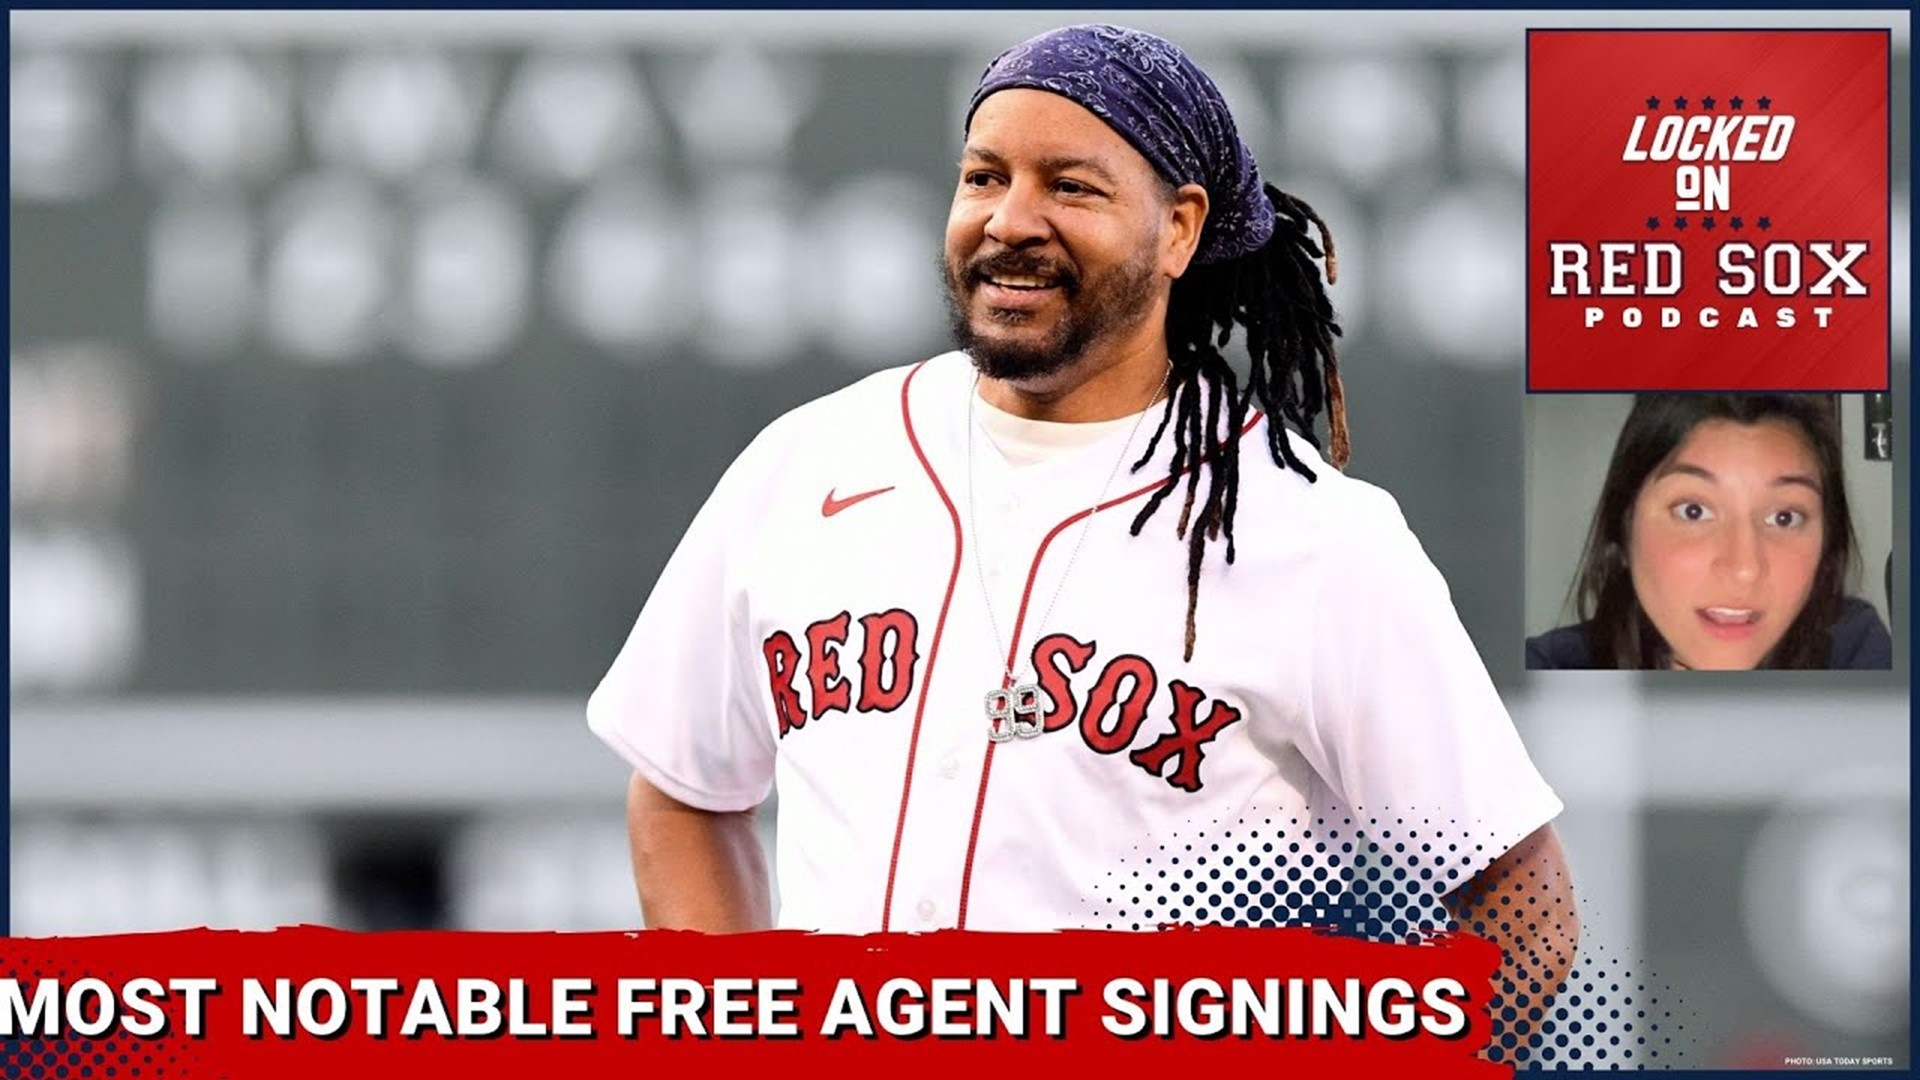 We all know the impact Manny Ramirez made during his time with the Boston Red Sox, but what about players like David Ortiz, David Price, and J.D. Martinez?